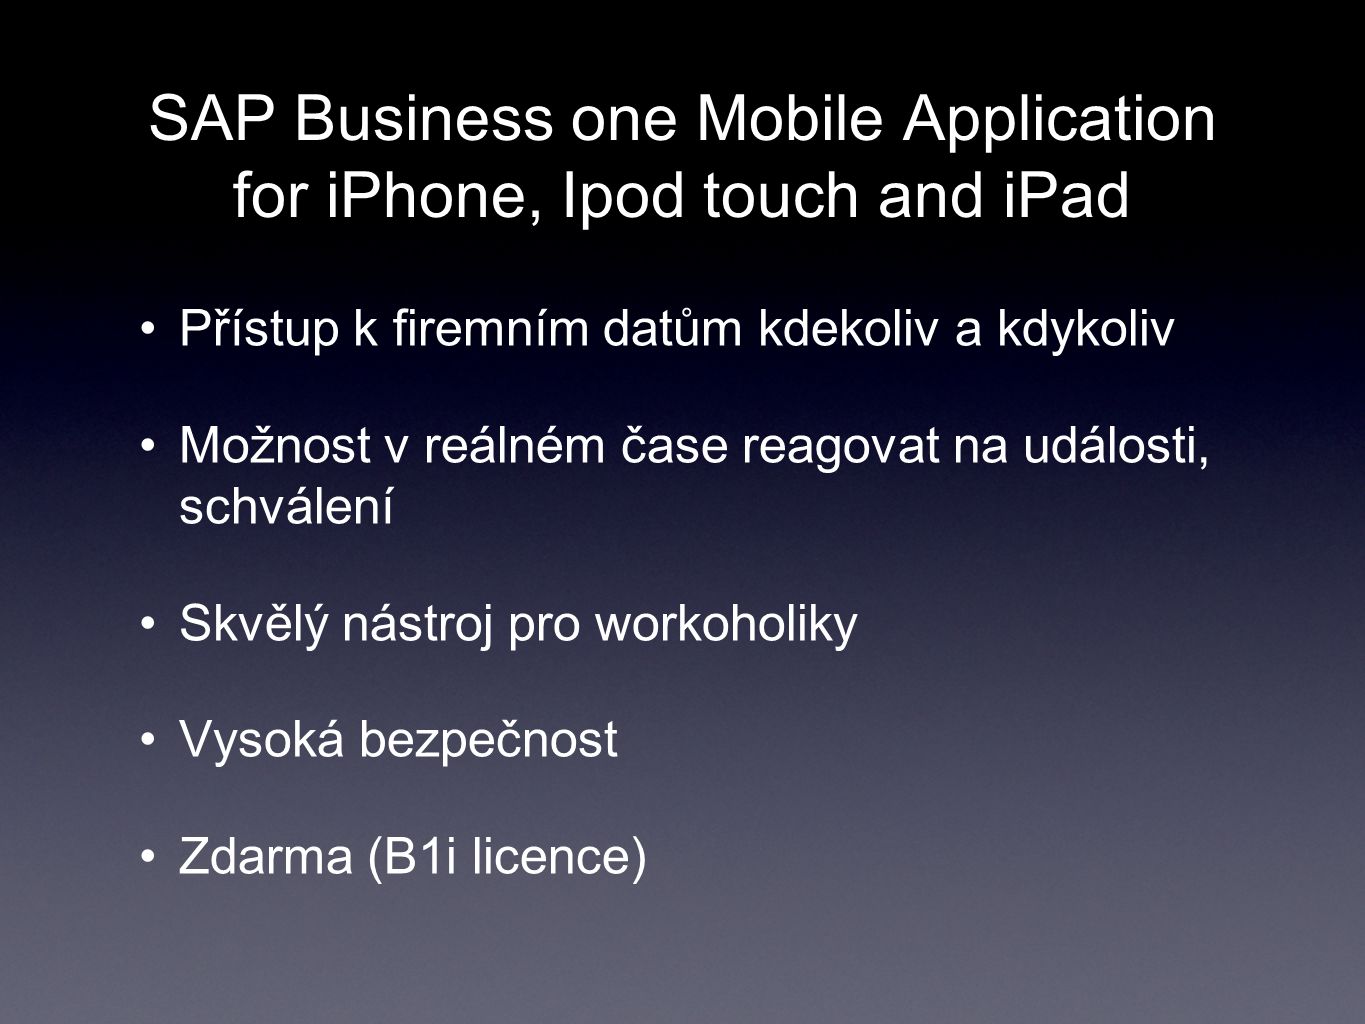 SAP Business one Mobile Application for iPhone, Ipod touch and iPad